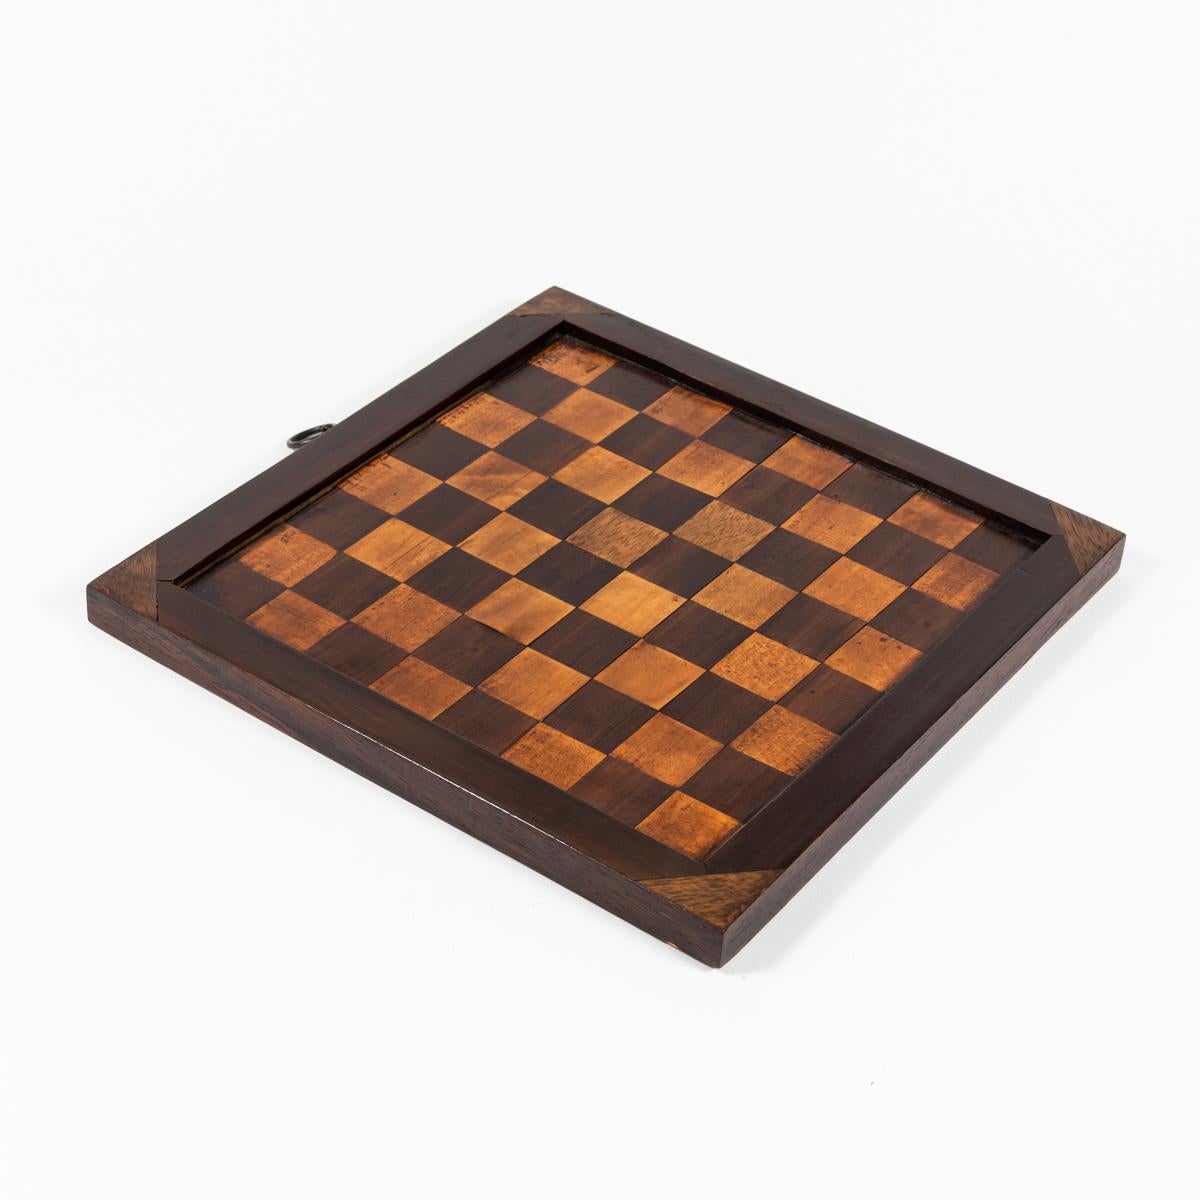 English 19th Century Antique Inlaid Wood Checkerboard For Sale